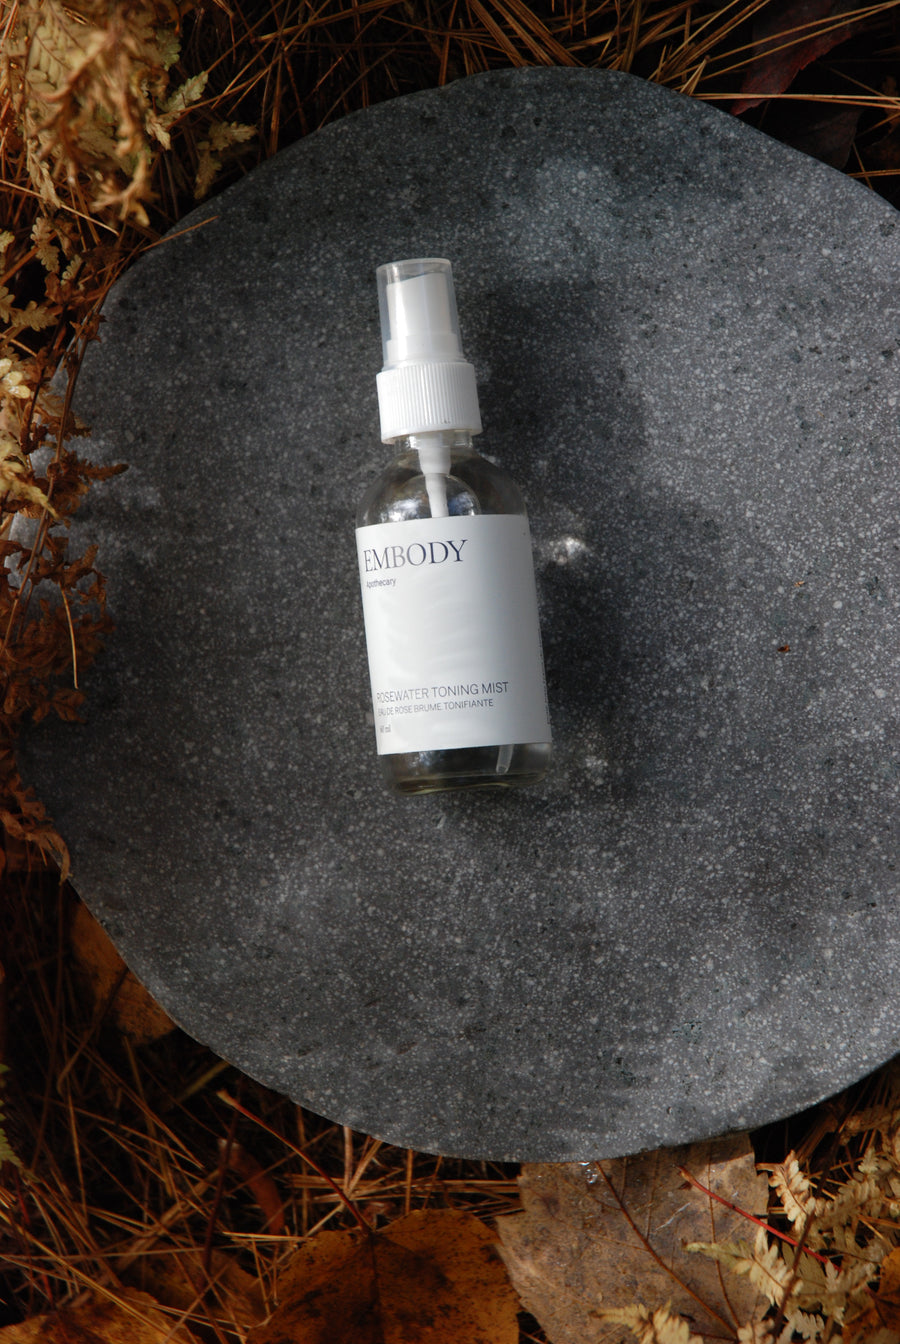 The handcrafted, all natural Rosewater Facial Toning Mist, made with pure Rose hydrosol, sits in a forest.